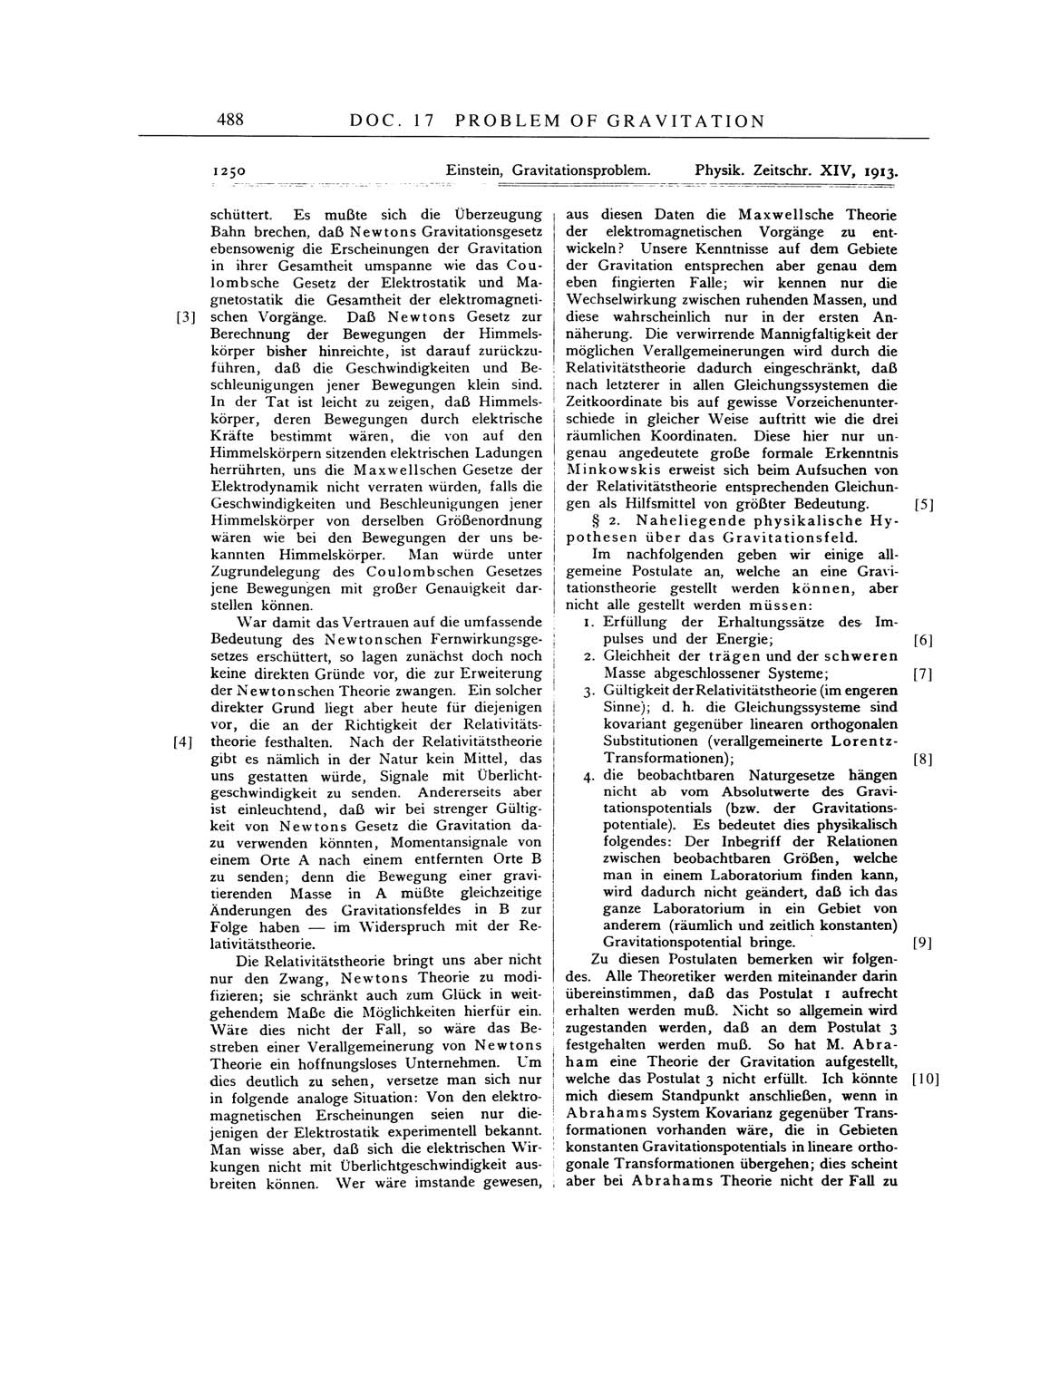 Volume 4: The Swiss Years: Writings 1912-1914 page 488